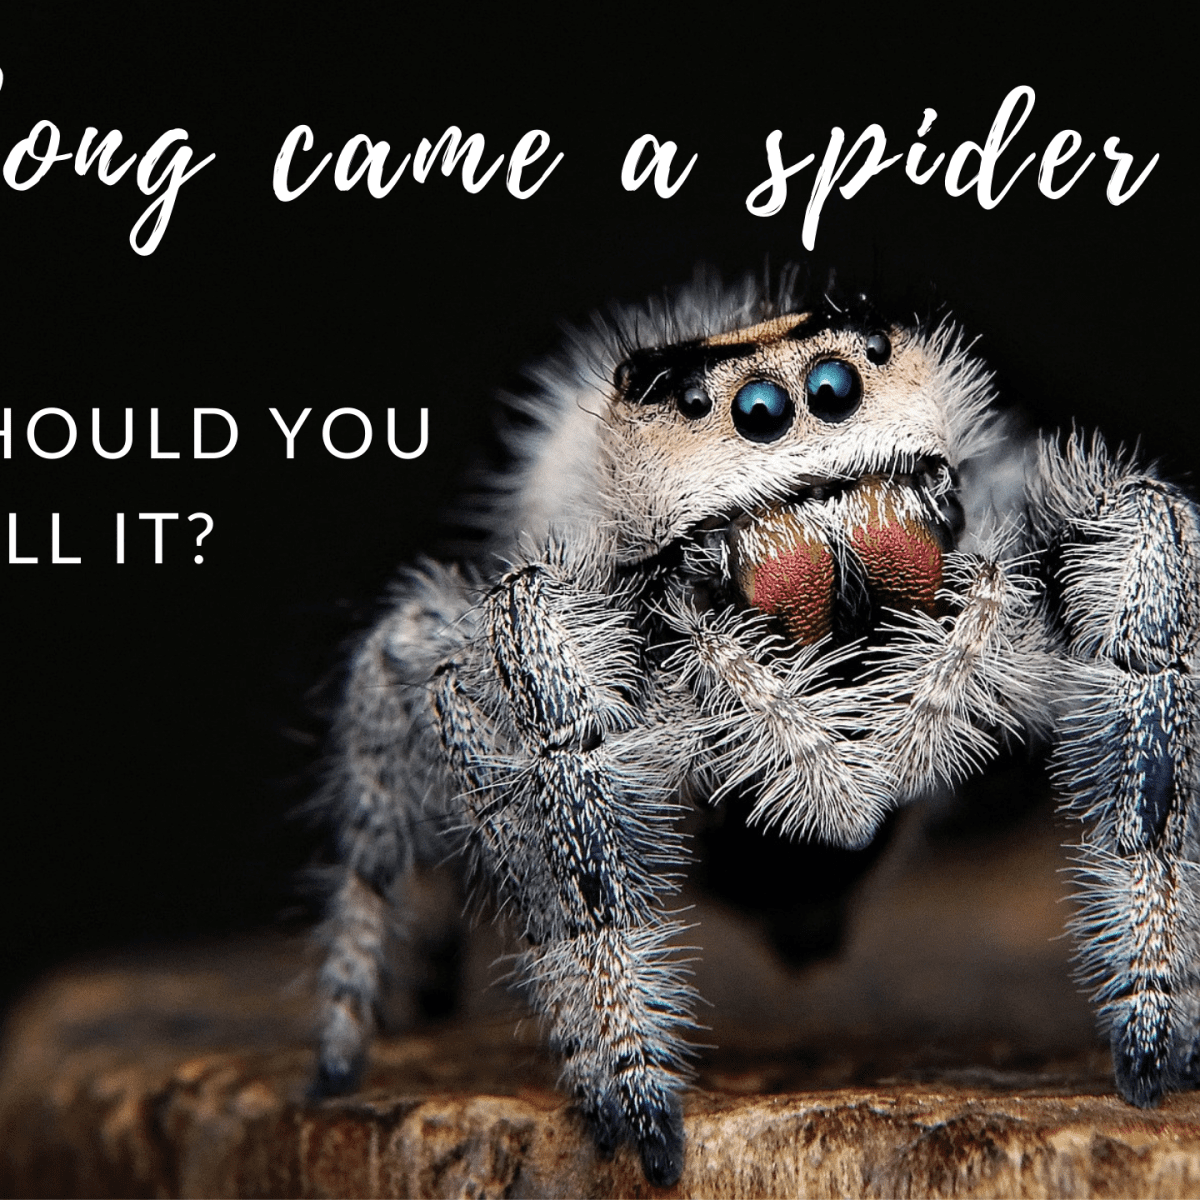 How jumping spiders became the new 'it' pets